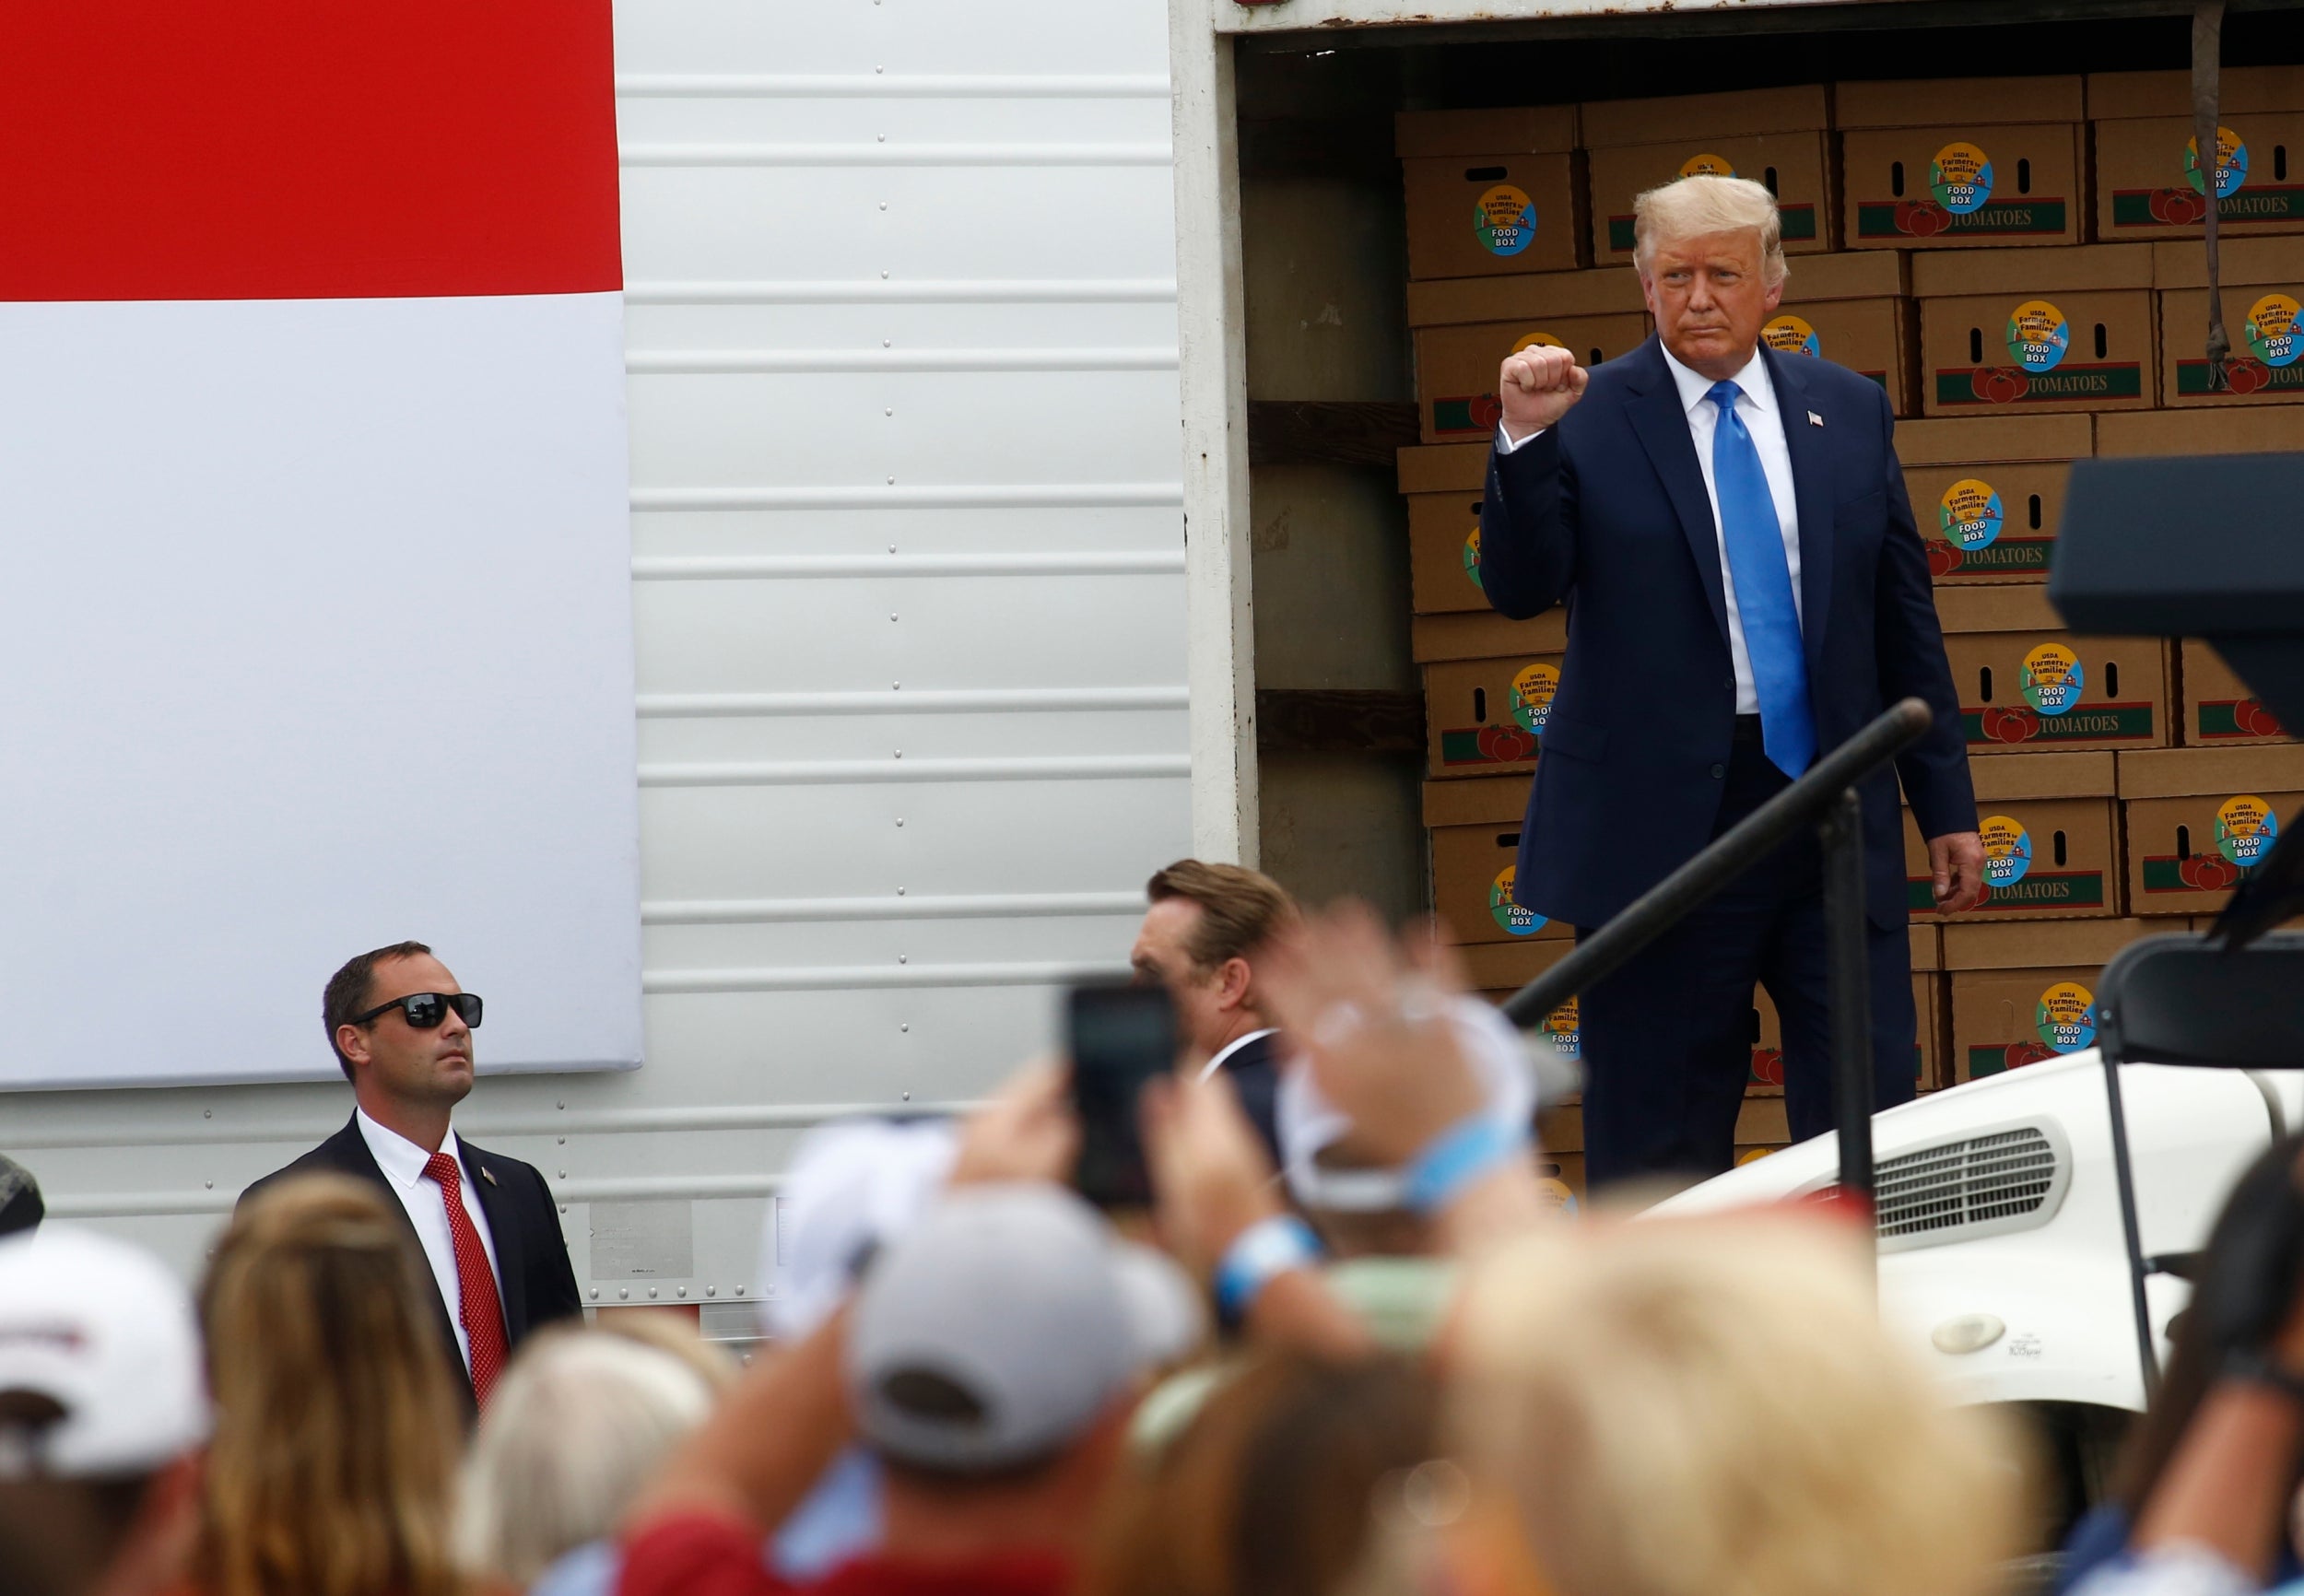 Donald Trump leaves the stage after speaking at Flavor 1st Growers &amp; Packers on August 24, 2020 in Mills River, North Carolina